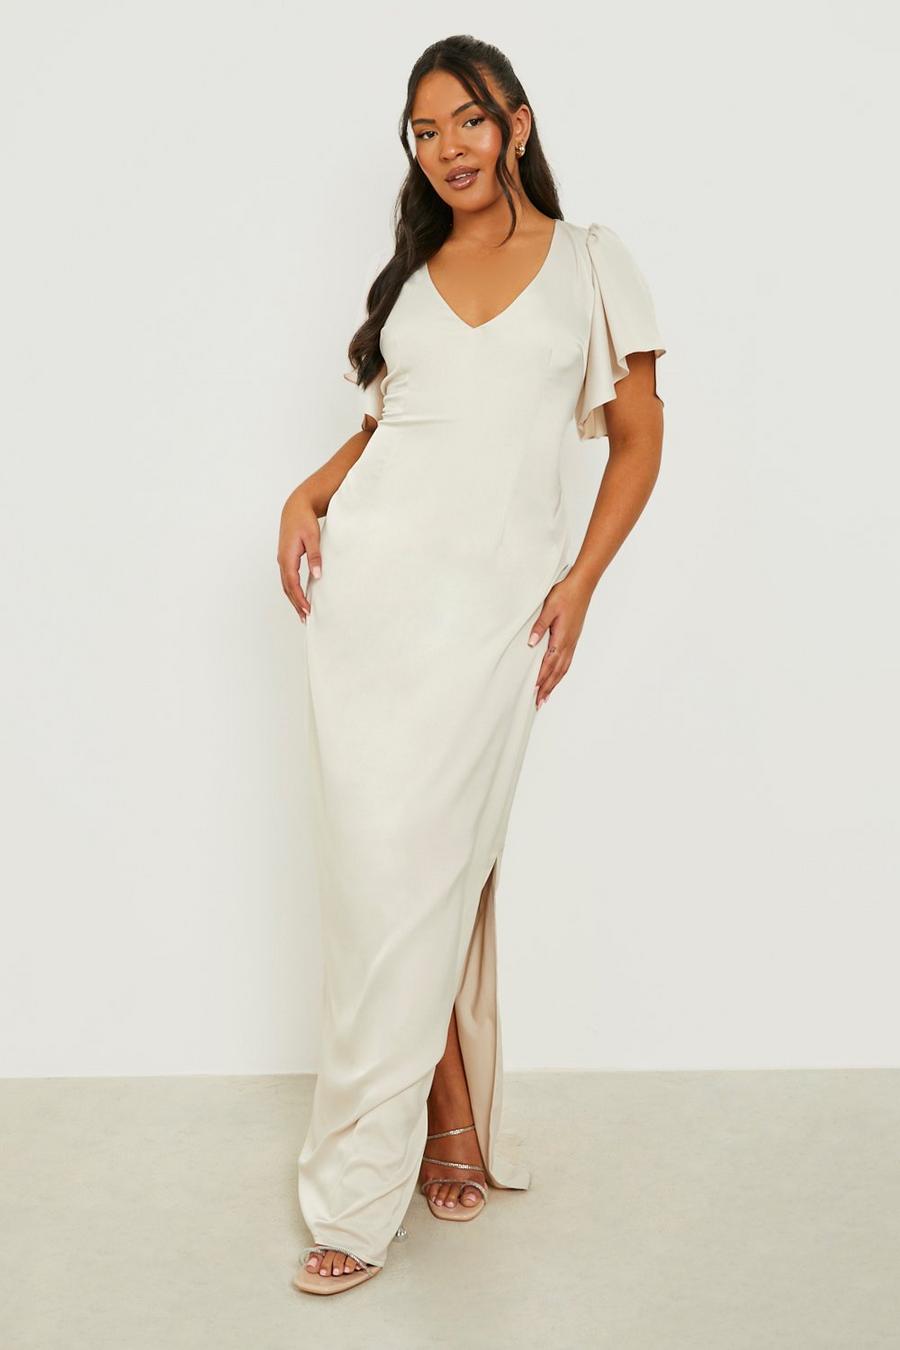 Champagne beis Plus Flute Satin Sleeve Maxi Dress 